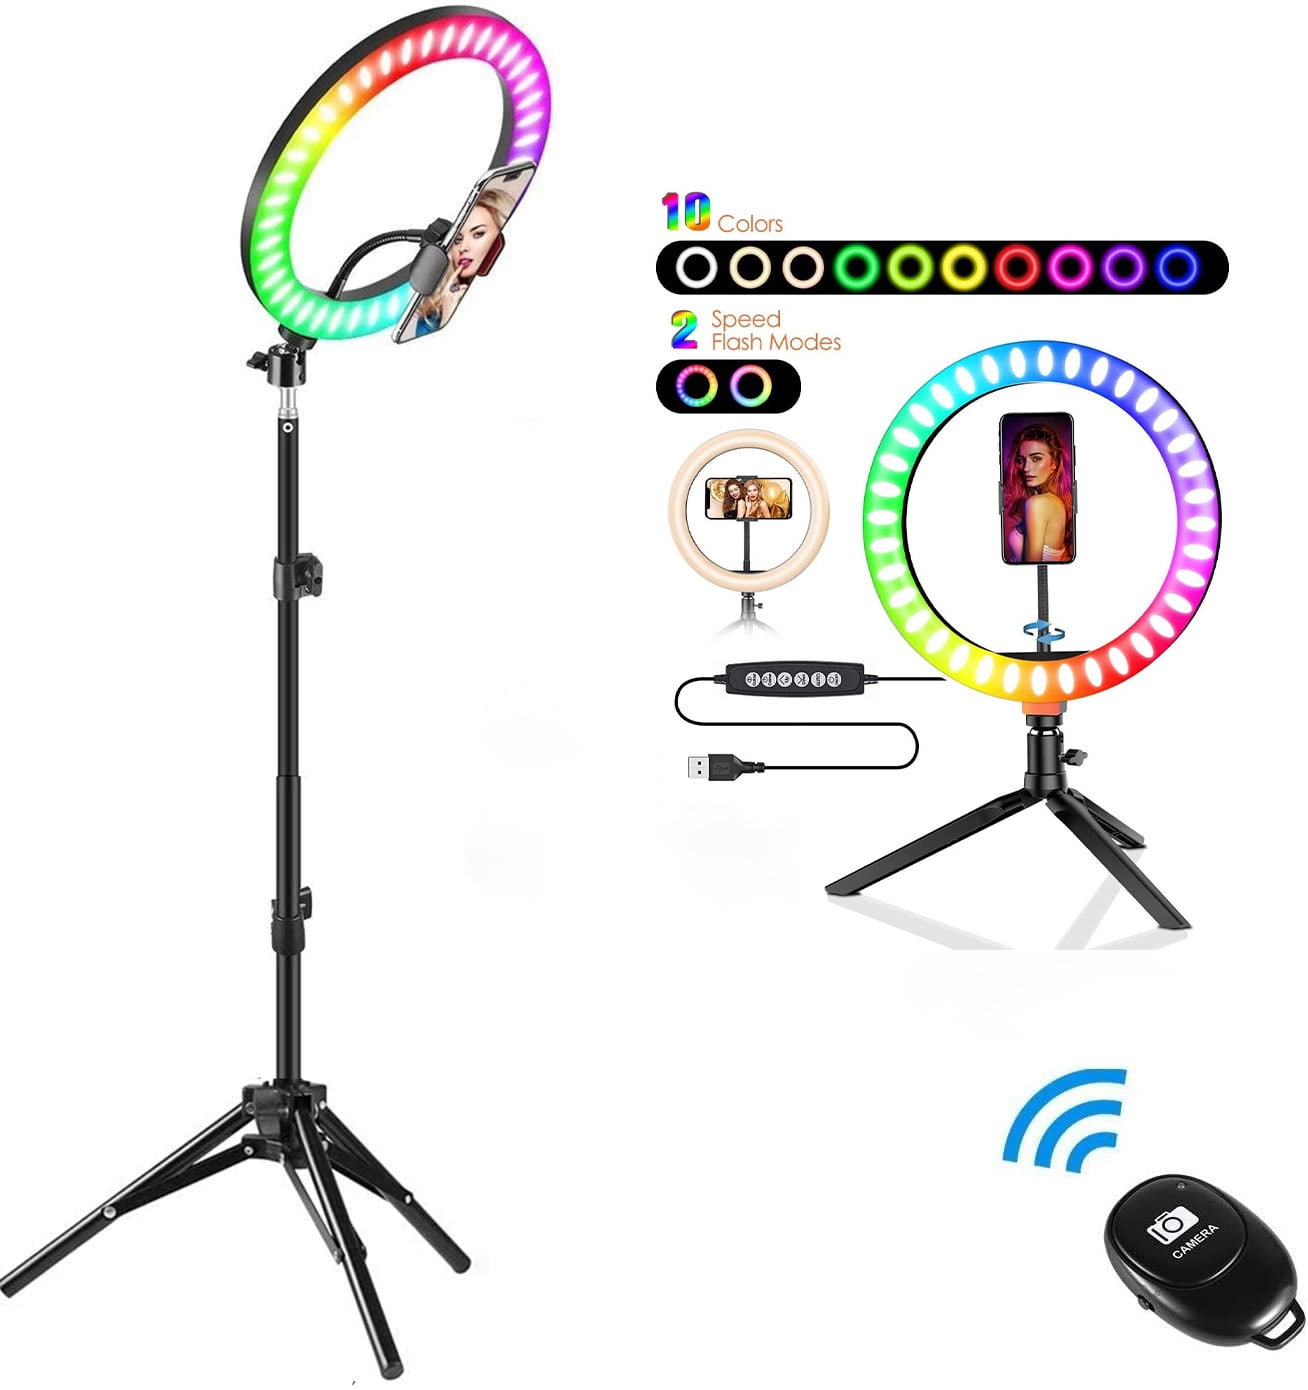 3-5M 10 Selfie Ring Light with Tripod Stand & Phone Holder MOZX LED Ring Light Dimmable Ring Light with Remote Control 20 Colors Switch at Will for Live Streaming Makeup Video,Style 3 